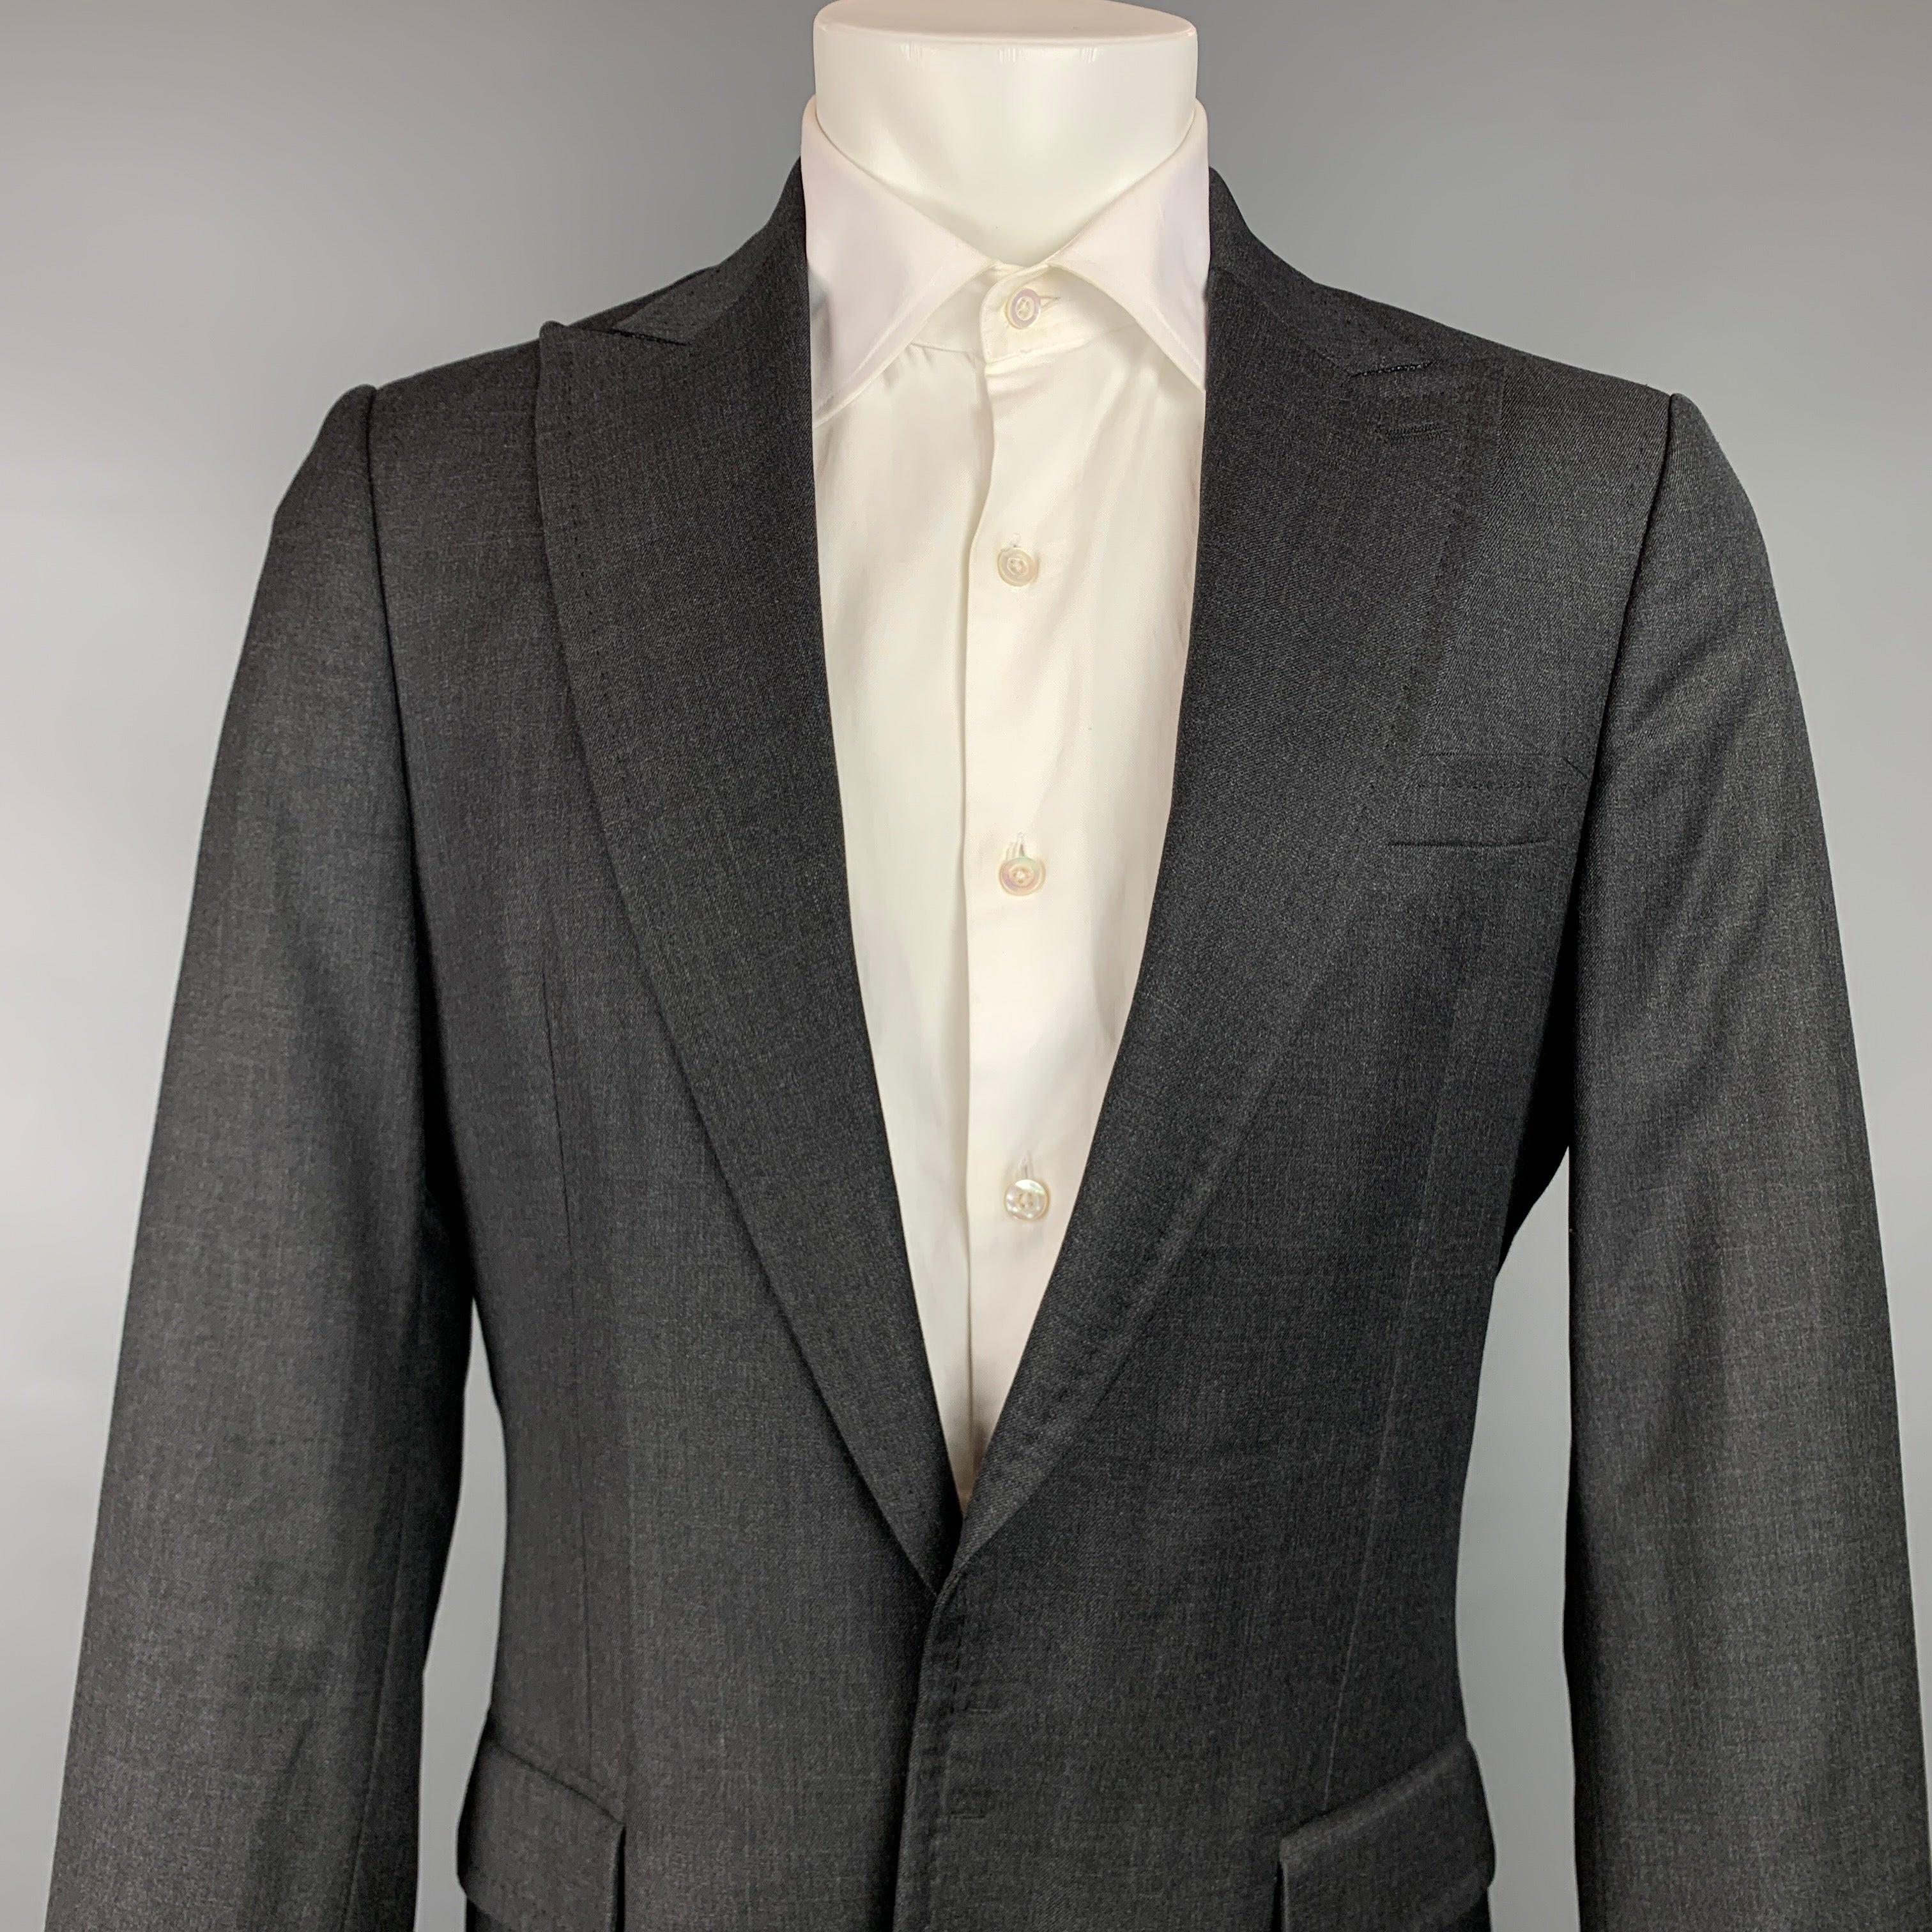 DSQUARED2
sport coat comes in a charcoal wool with a full liner featuring a peak lapel, flap pockets, and a hook & eye closure. Made in Italy.Very Good Pre-Owned Condition. 

Marked:   50 

Measurements: 
 
Shoulder: 17.5 inches  Chest: 40 inches 